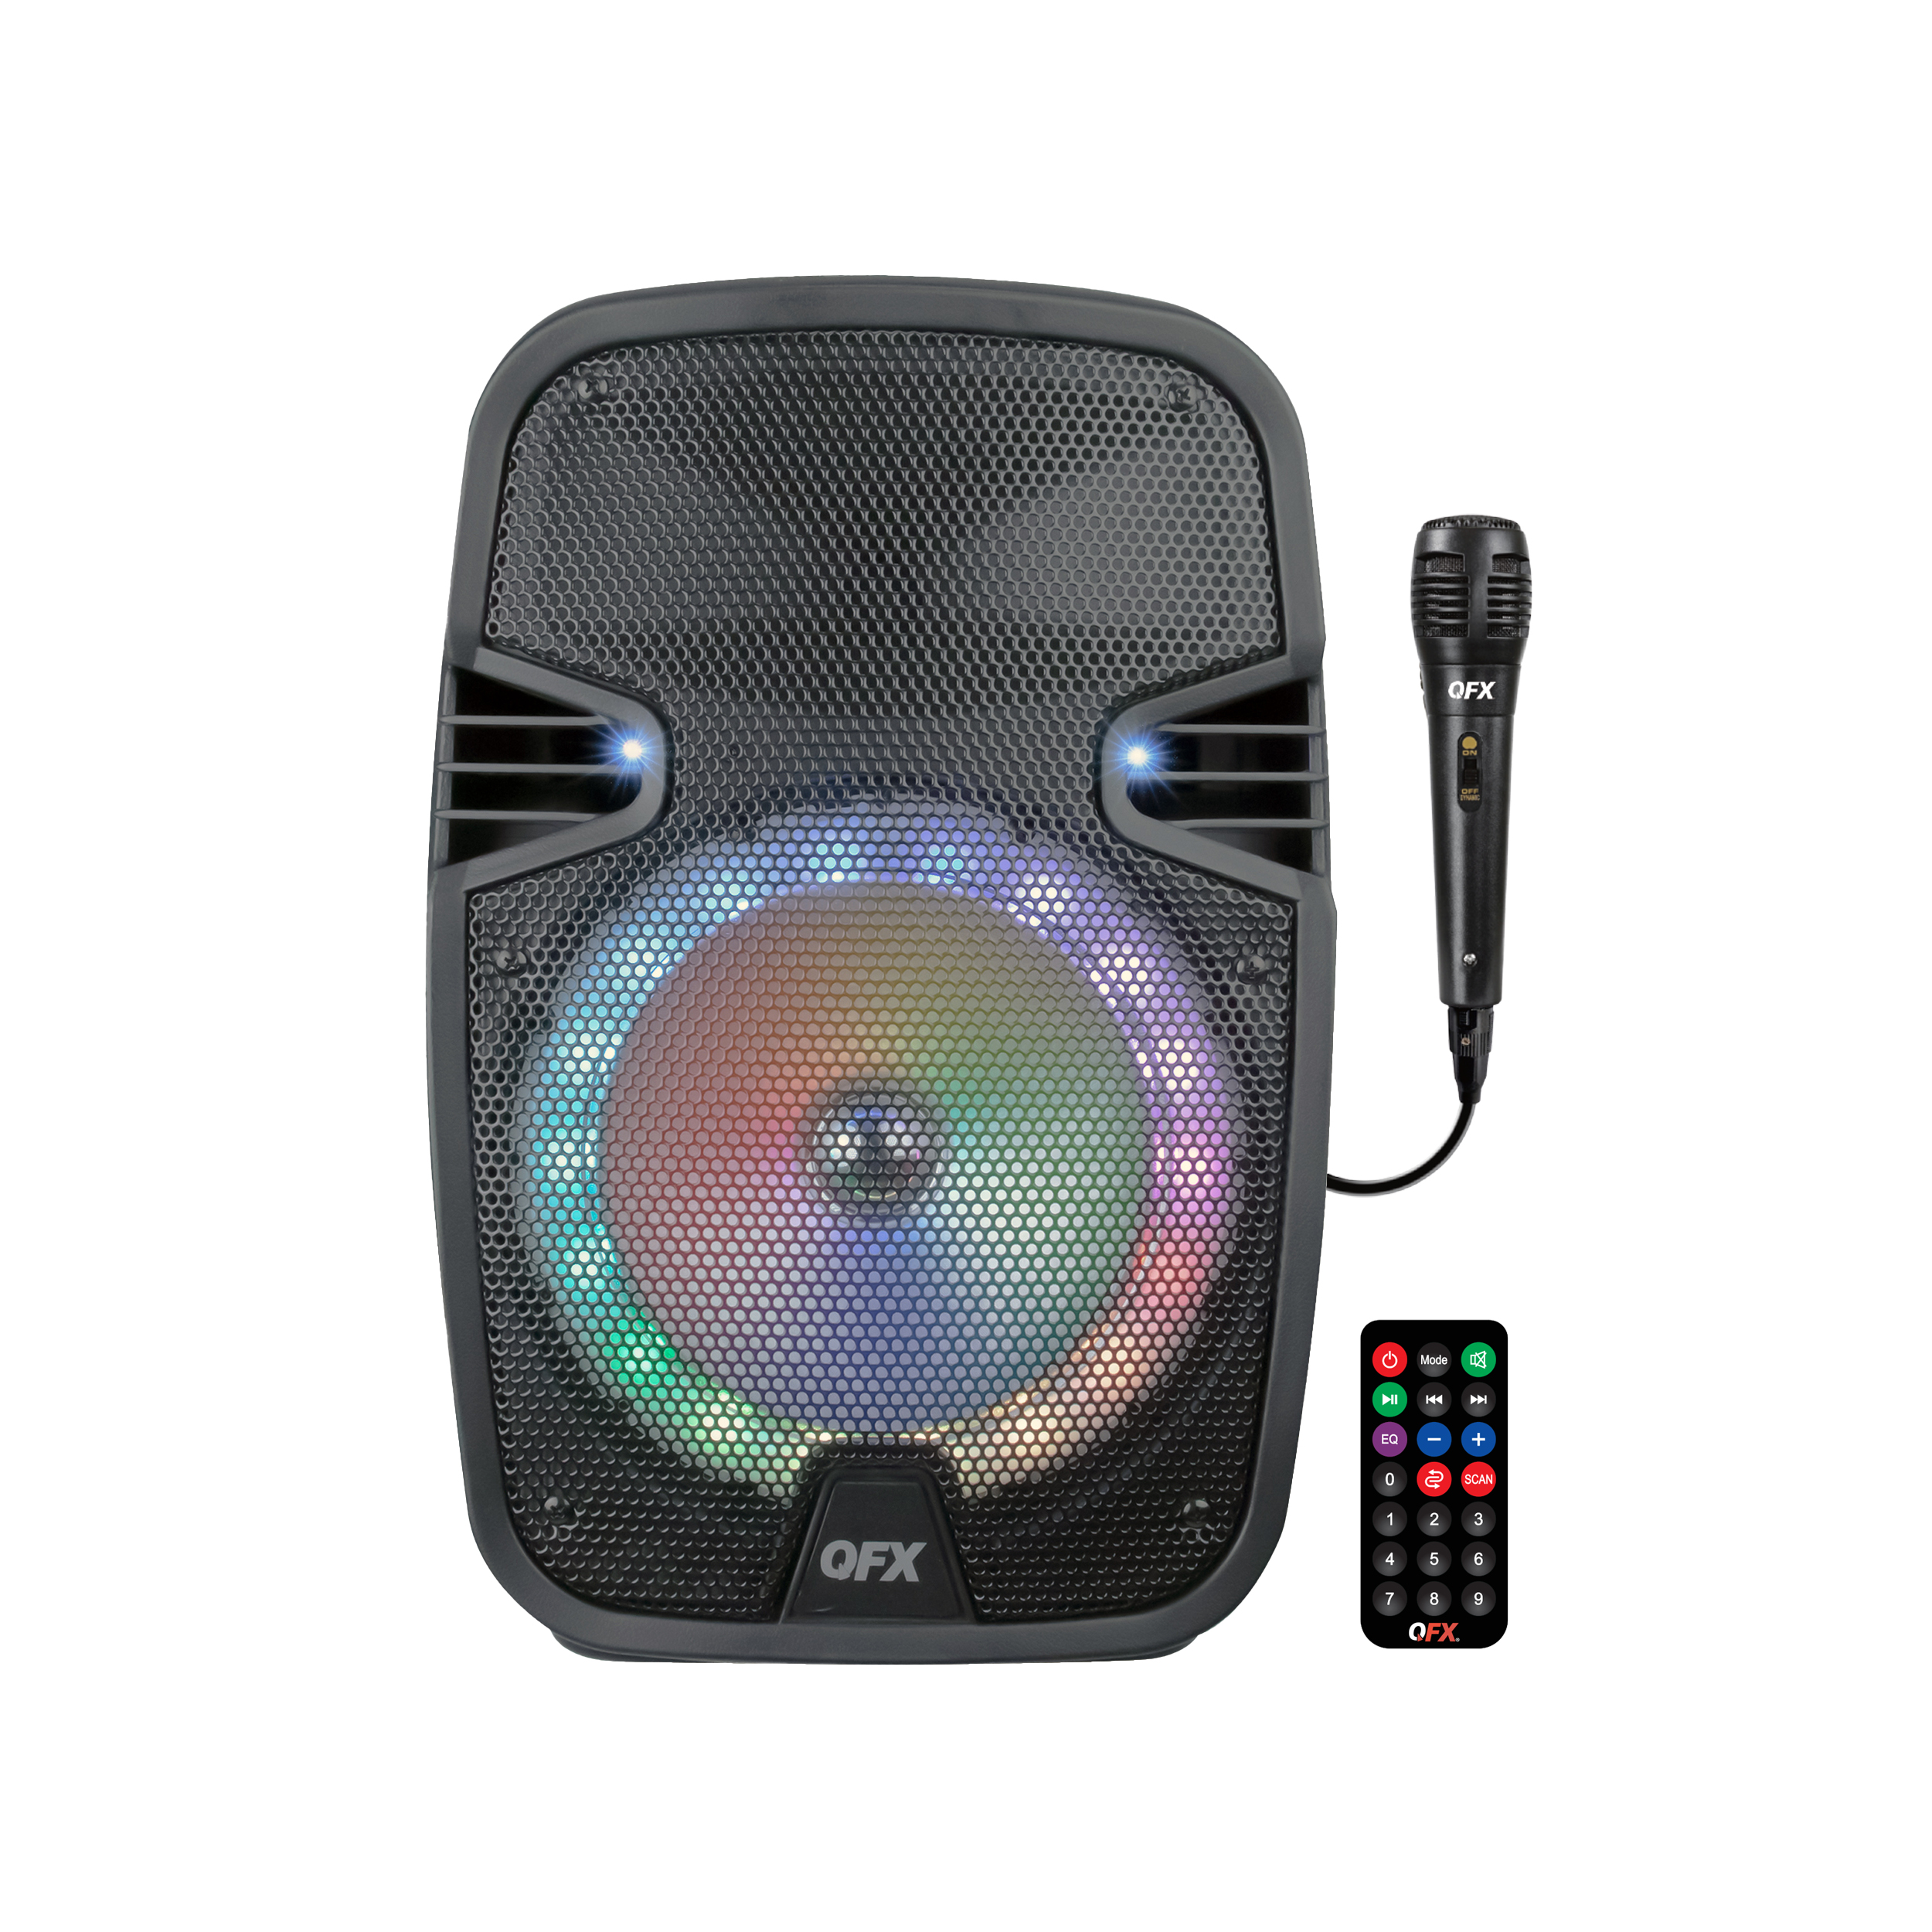 QFX PBX-8074 8” BLUETOOTH RECHARGEABLE SPEAKER WITH LED PARTY LIGHTS, INCLUDES WIRED MICROPHONE AND REMOTE - image 1 of 12